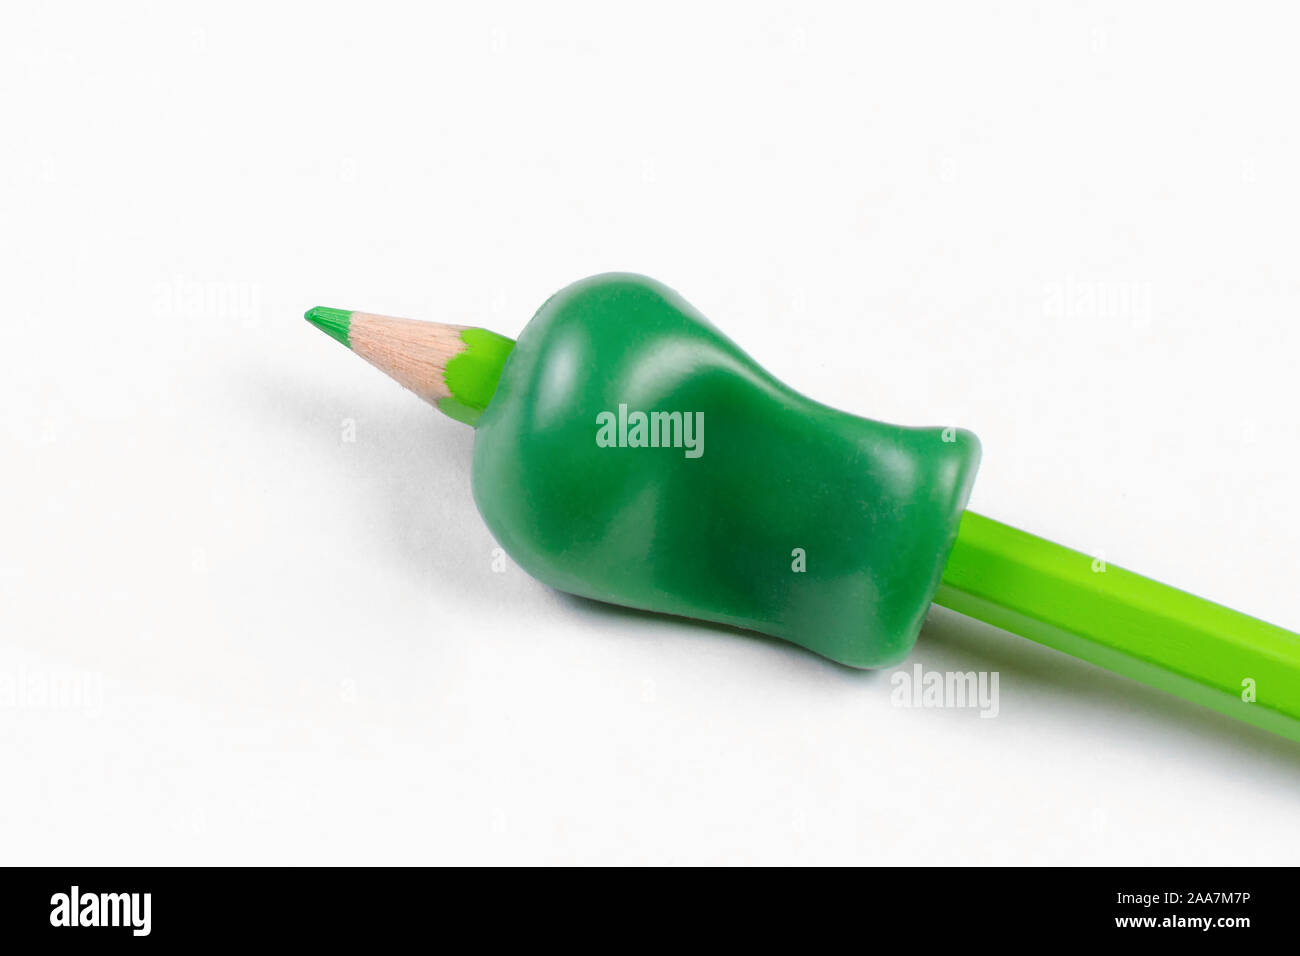 writing tool for help by incorrect holding of pencil Stock Photo